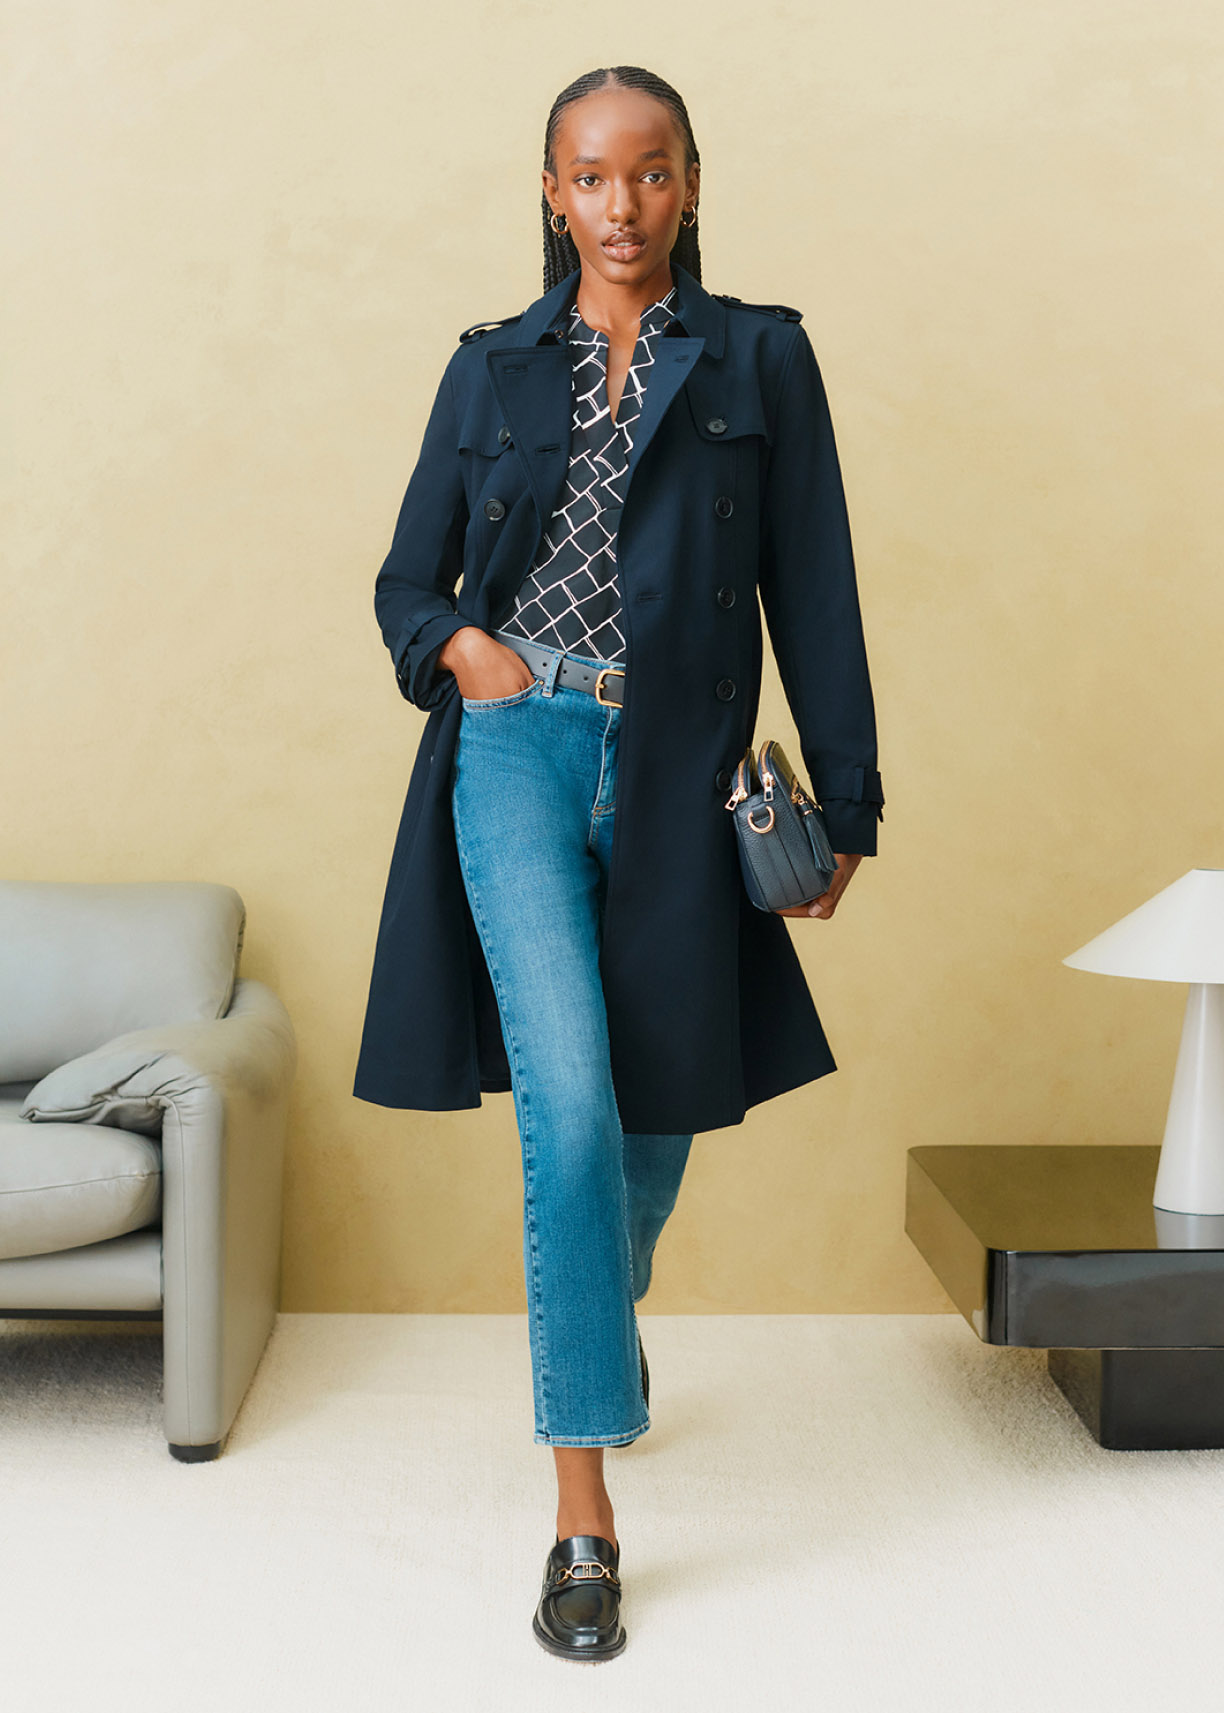 Navy Flare Jeans with Dark Green Coat Outfits (2 ideas & outfits